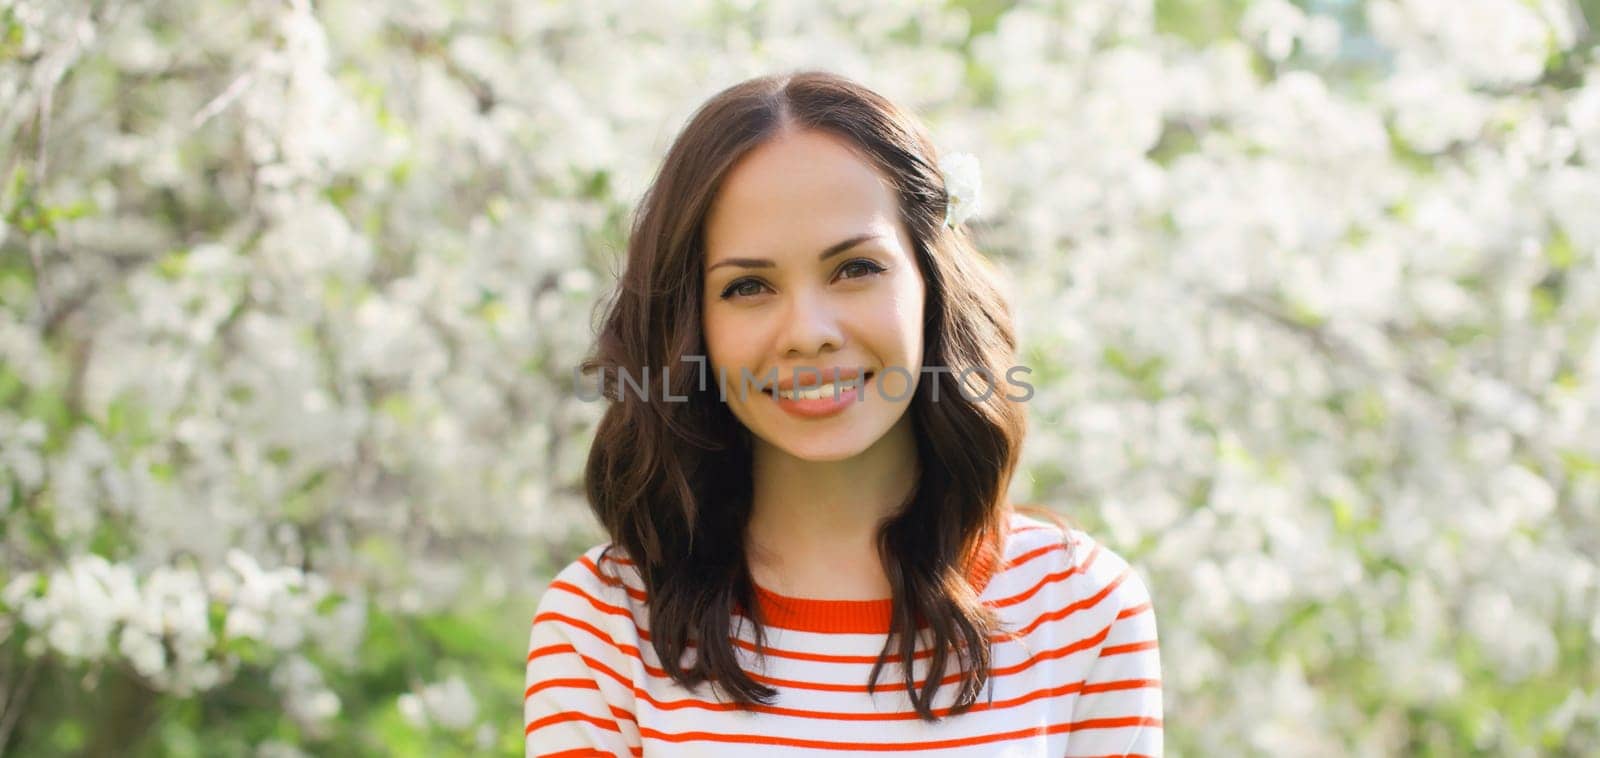 Portrait of lovely happy smiling young woman in spring blooming garden with white flowers on the trees in park